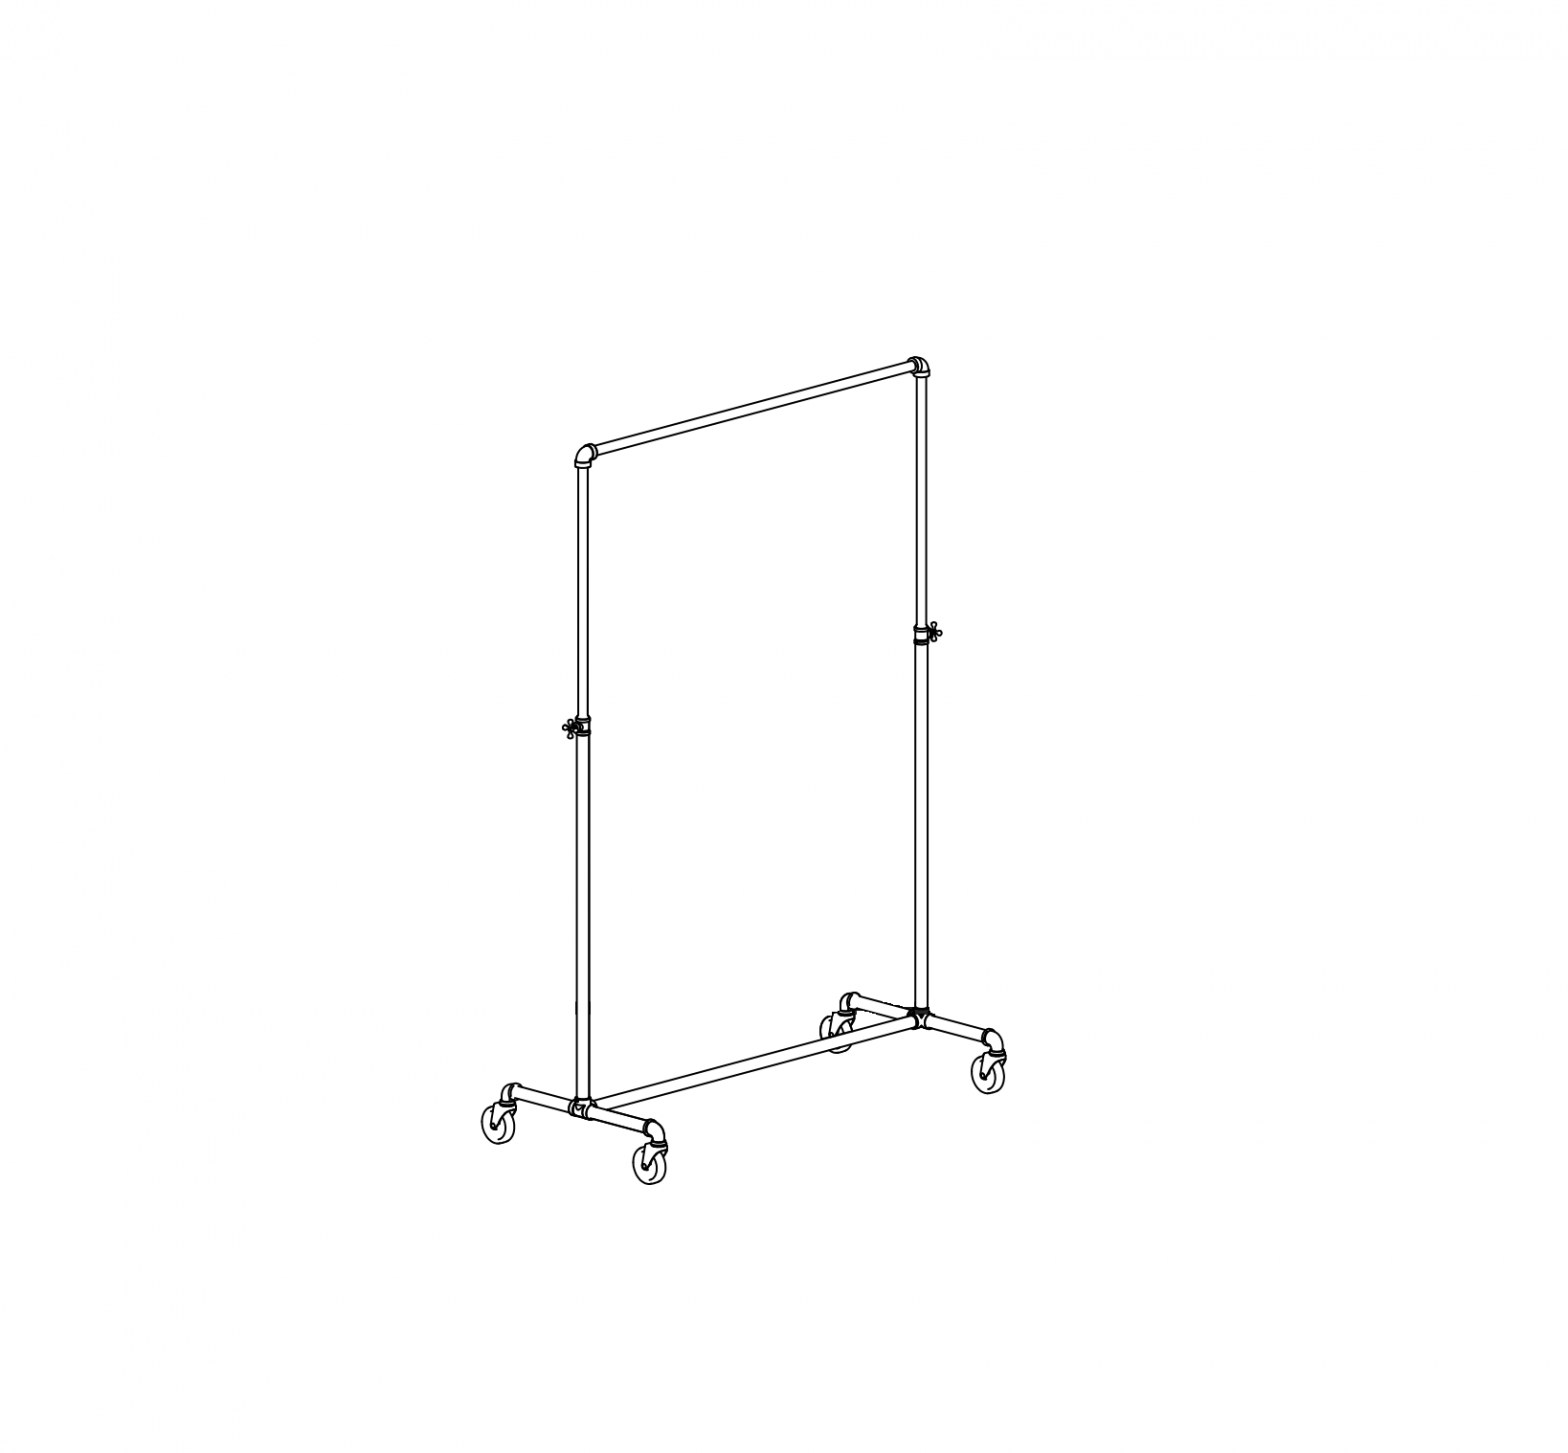 ULINE Pipe Clothing Rack Single Rail Installation Guide